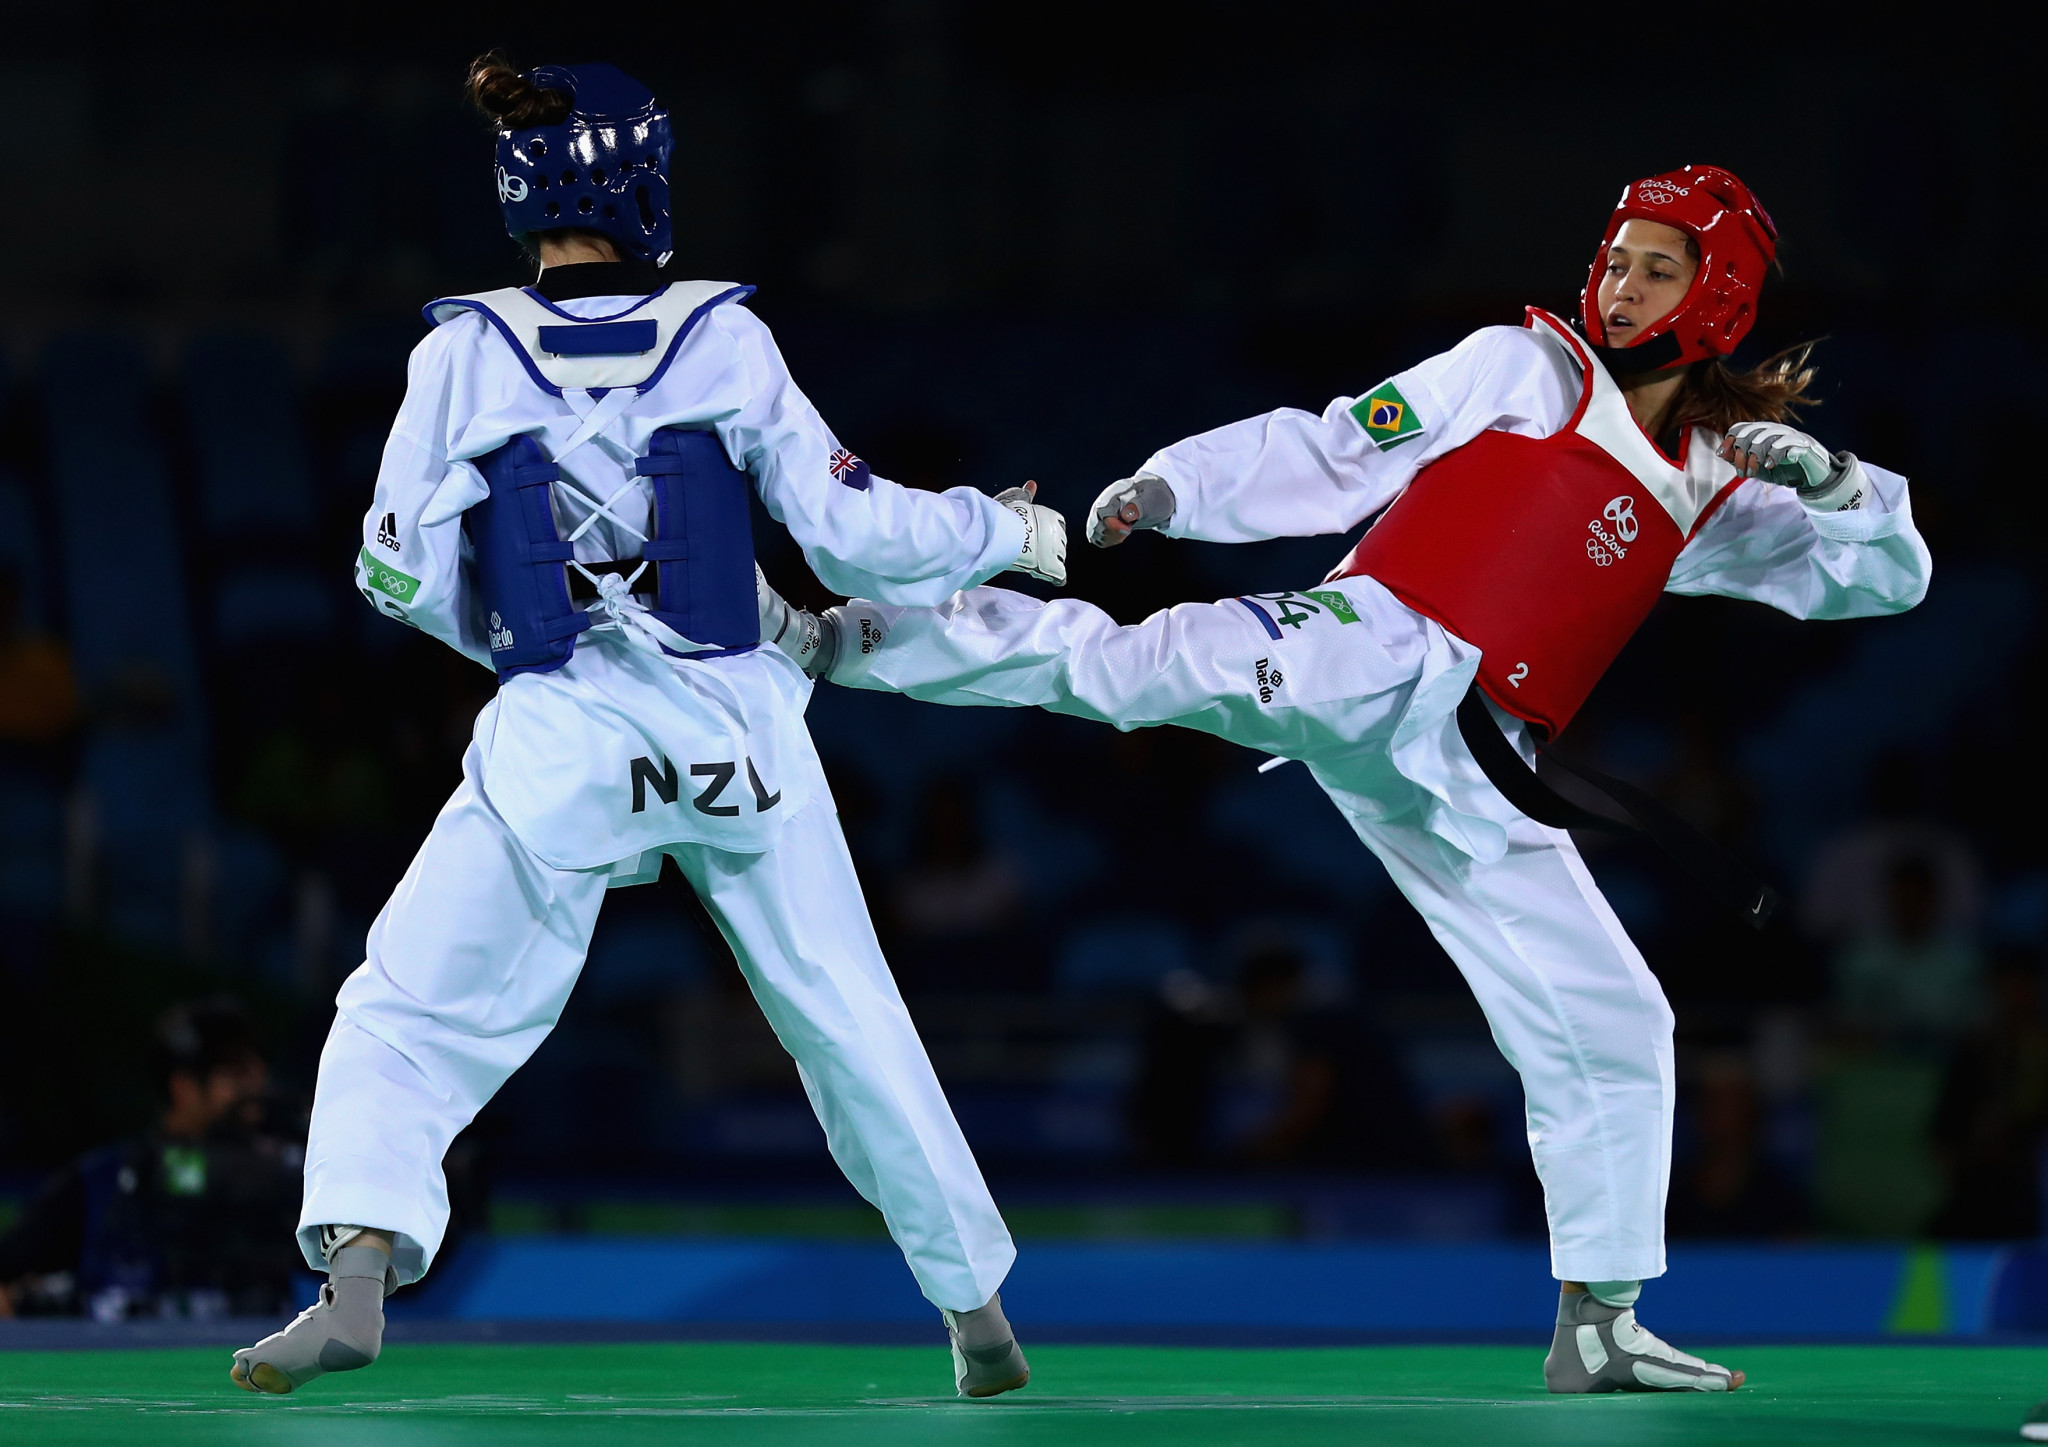 Taekwondo in New Zealand has been hit by governance issues ©Getty Images